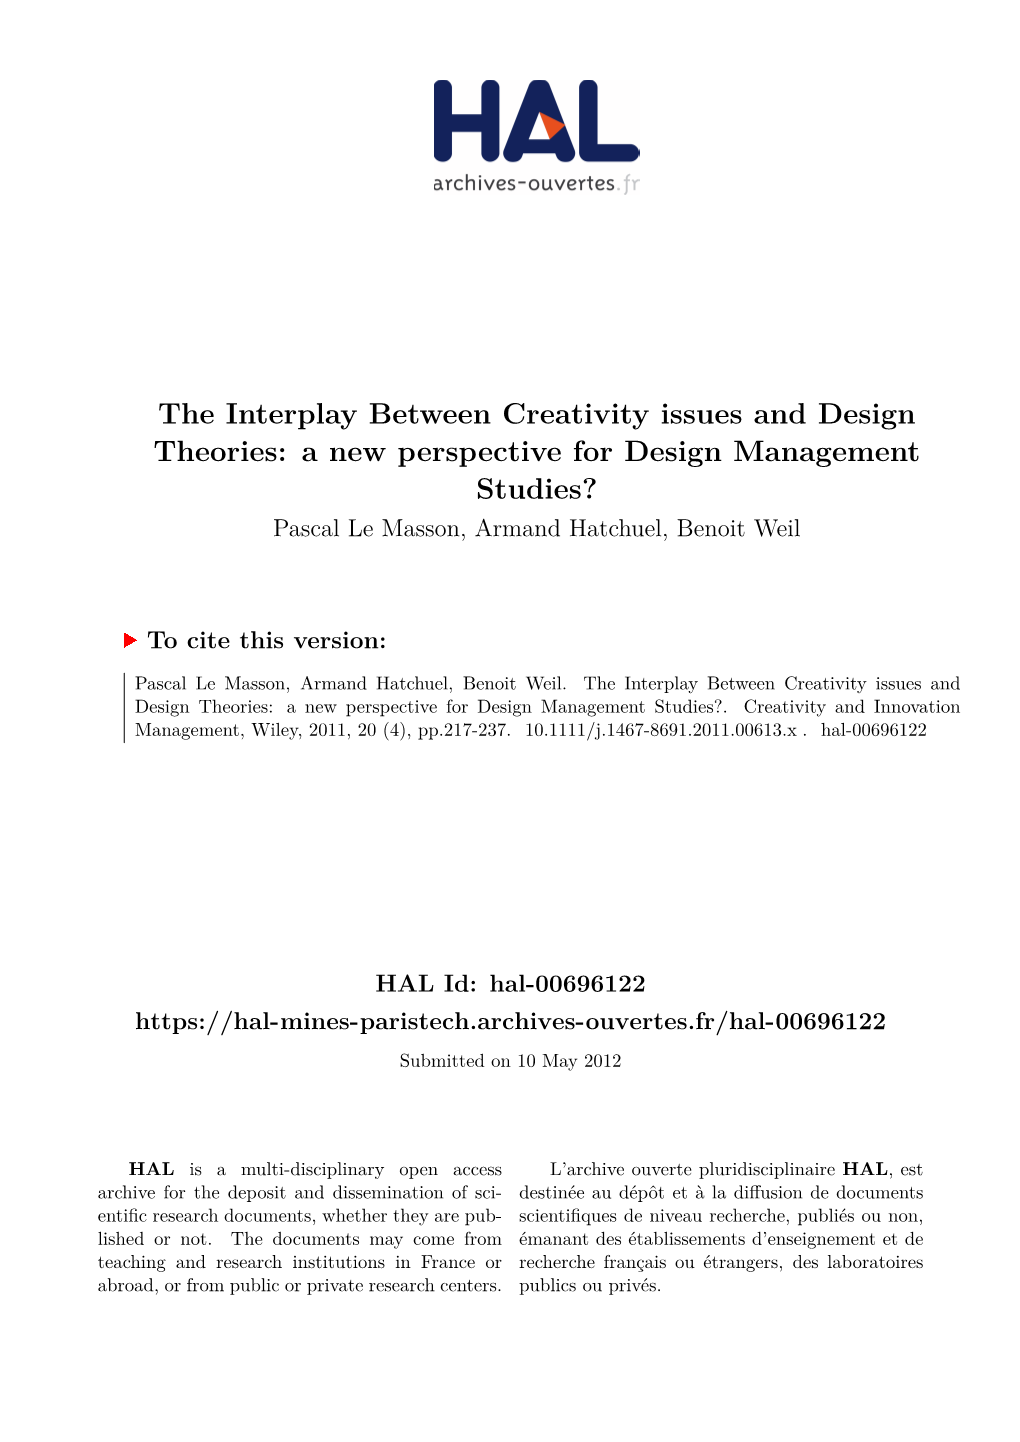 The Interplay Between Creativity Issues and Design Theories: a New Perspective for Design Management Studies? Pascal Le Masson, Armand Hatchuel, Benoit Weil